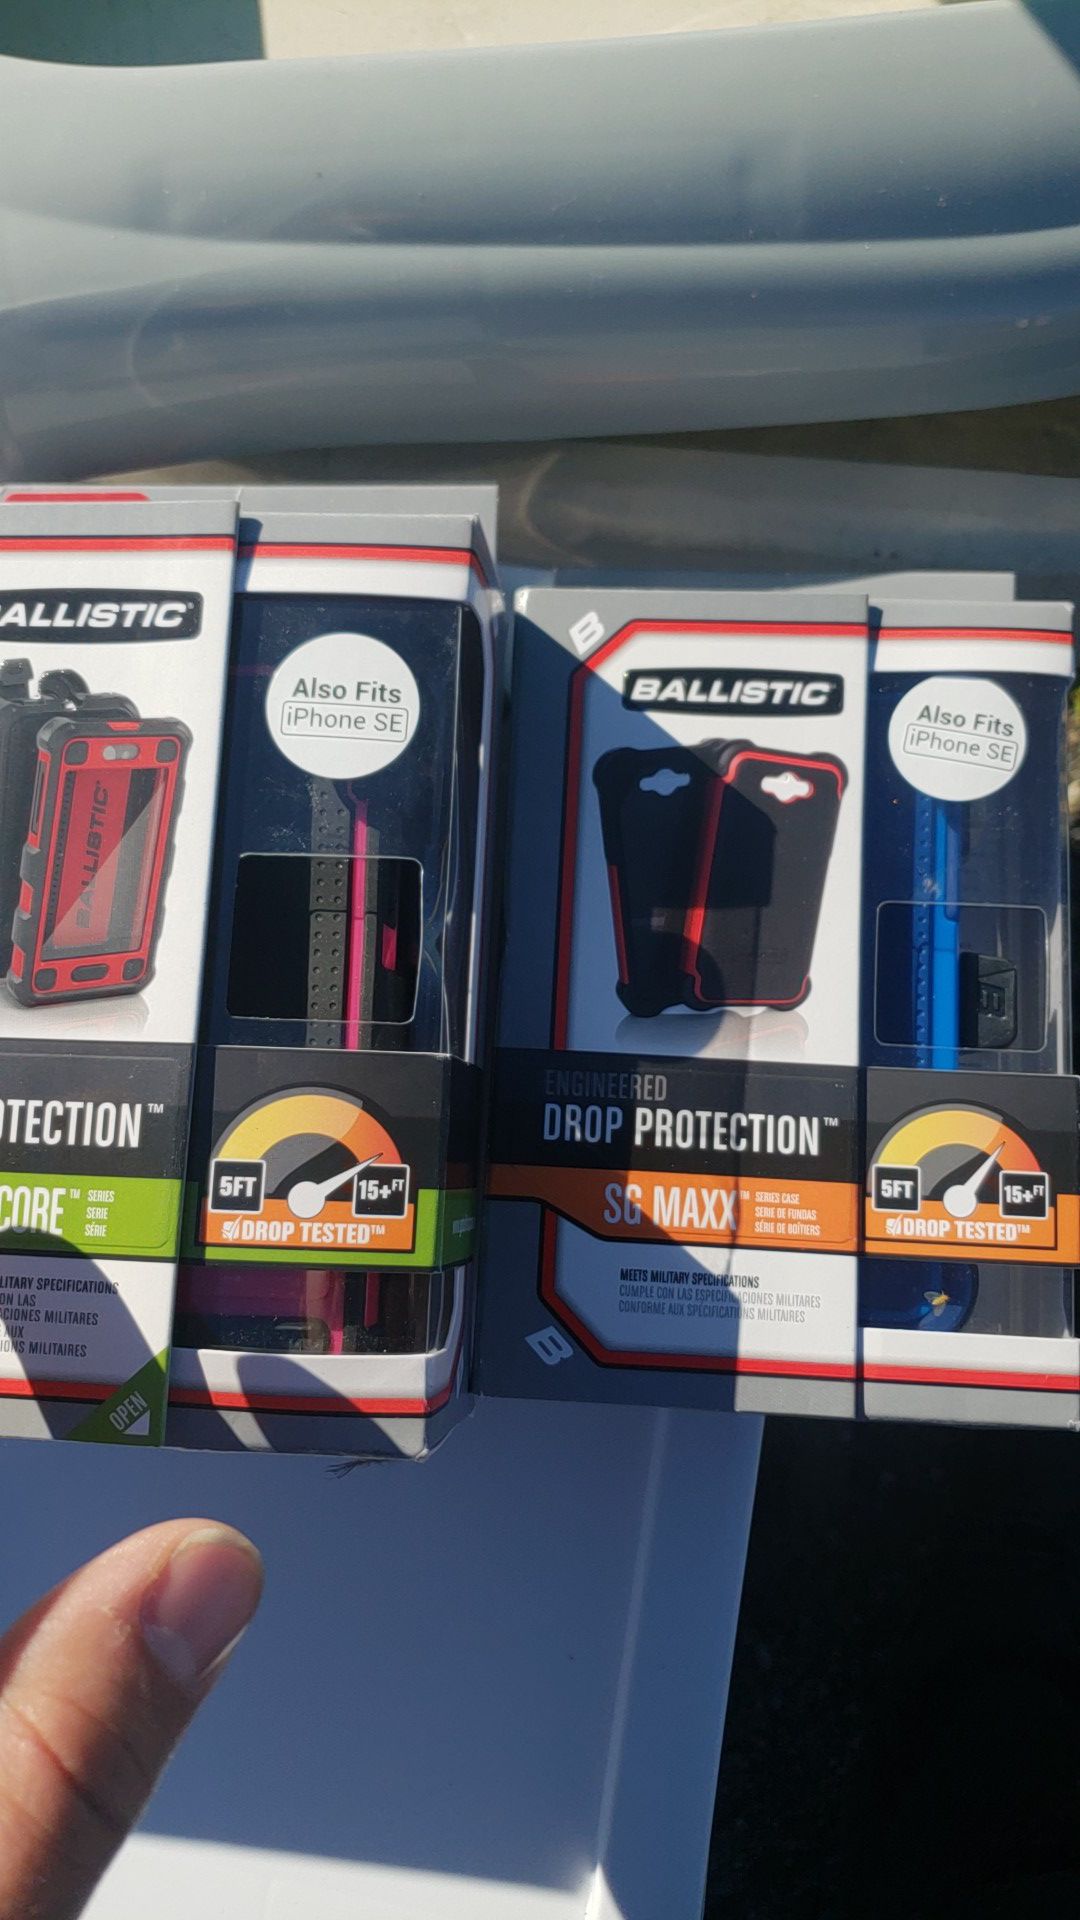 Iphone 5 and iphone 5s ballistic cover